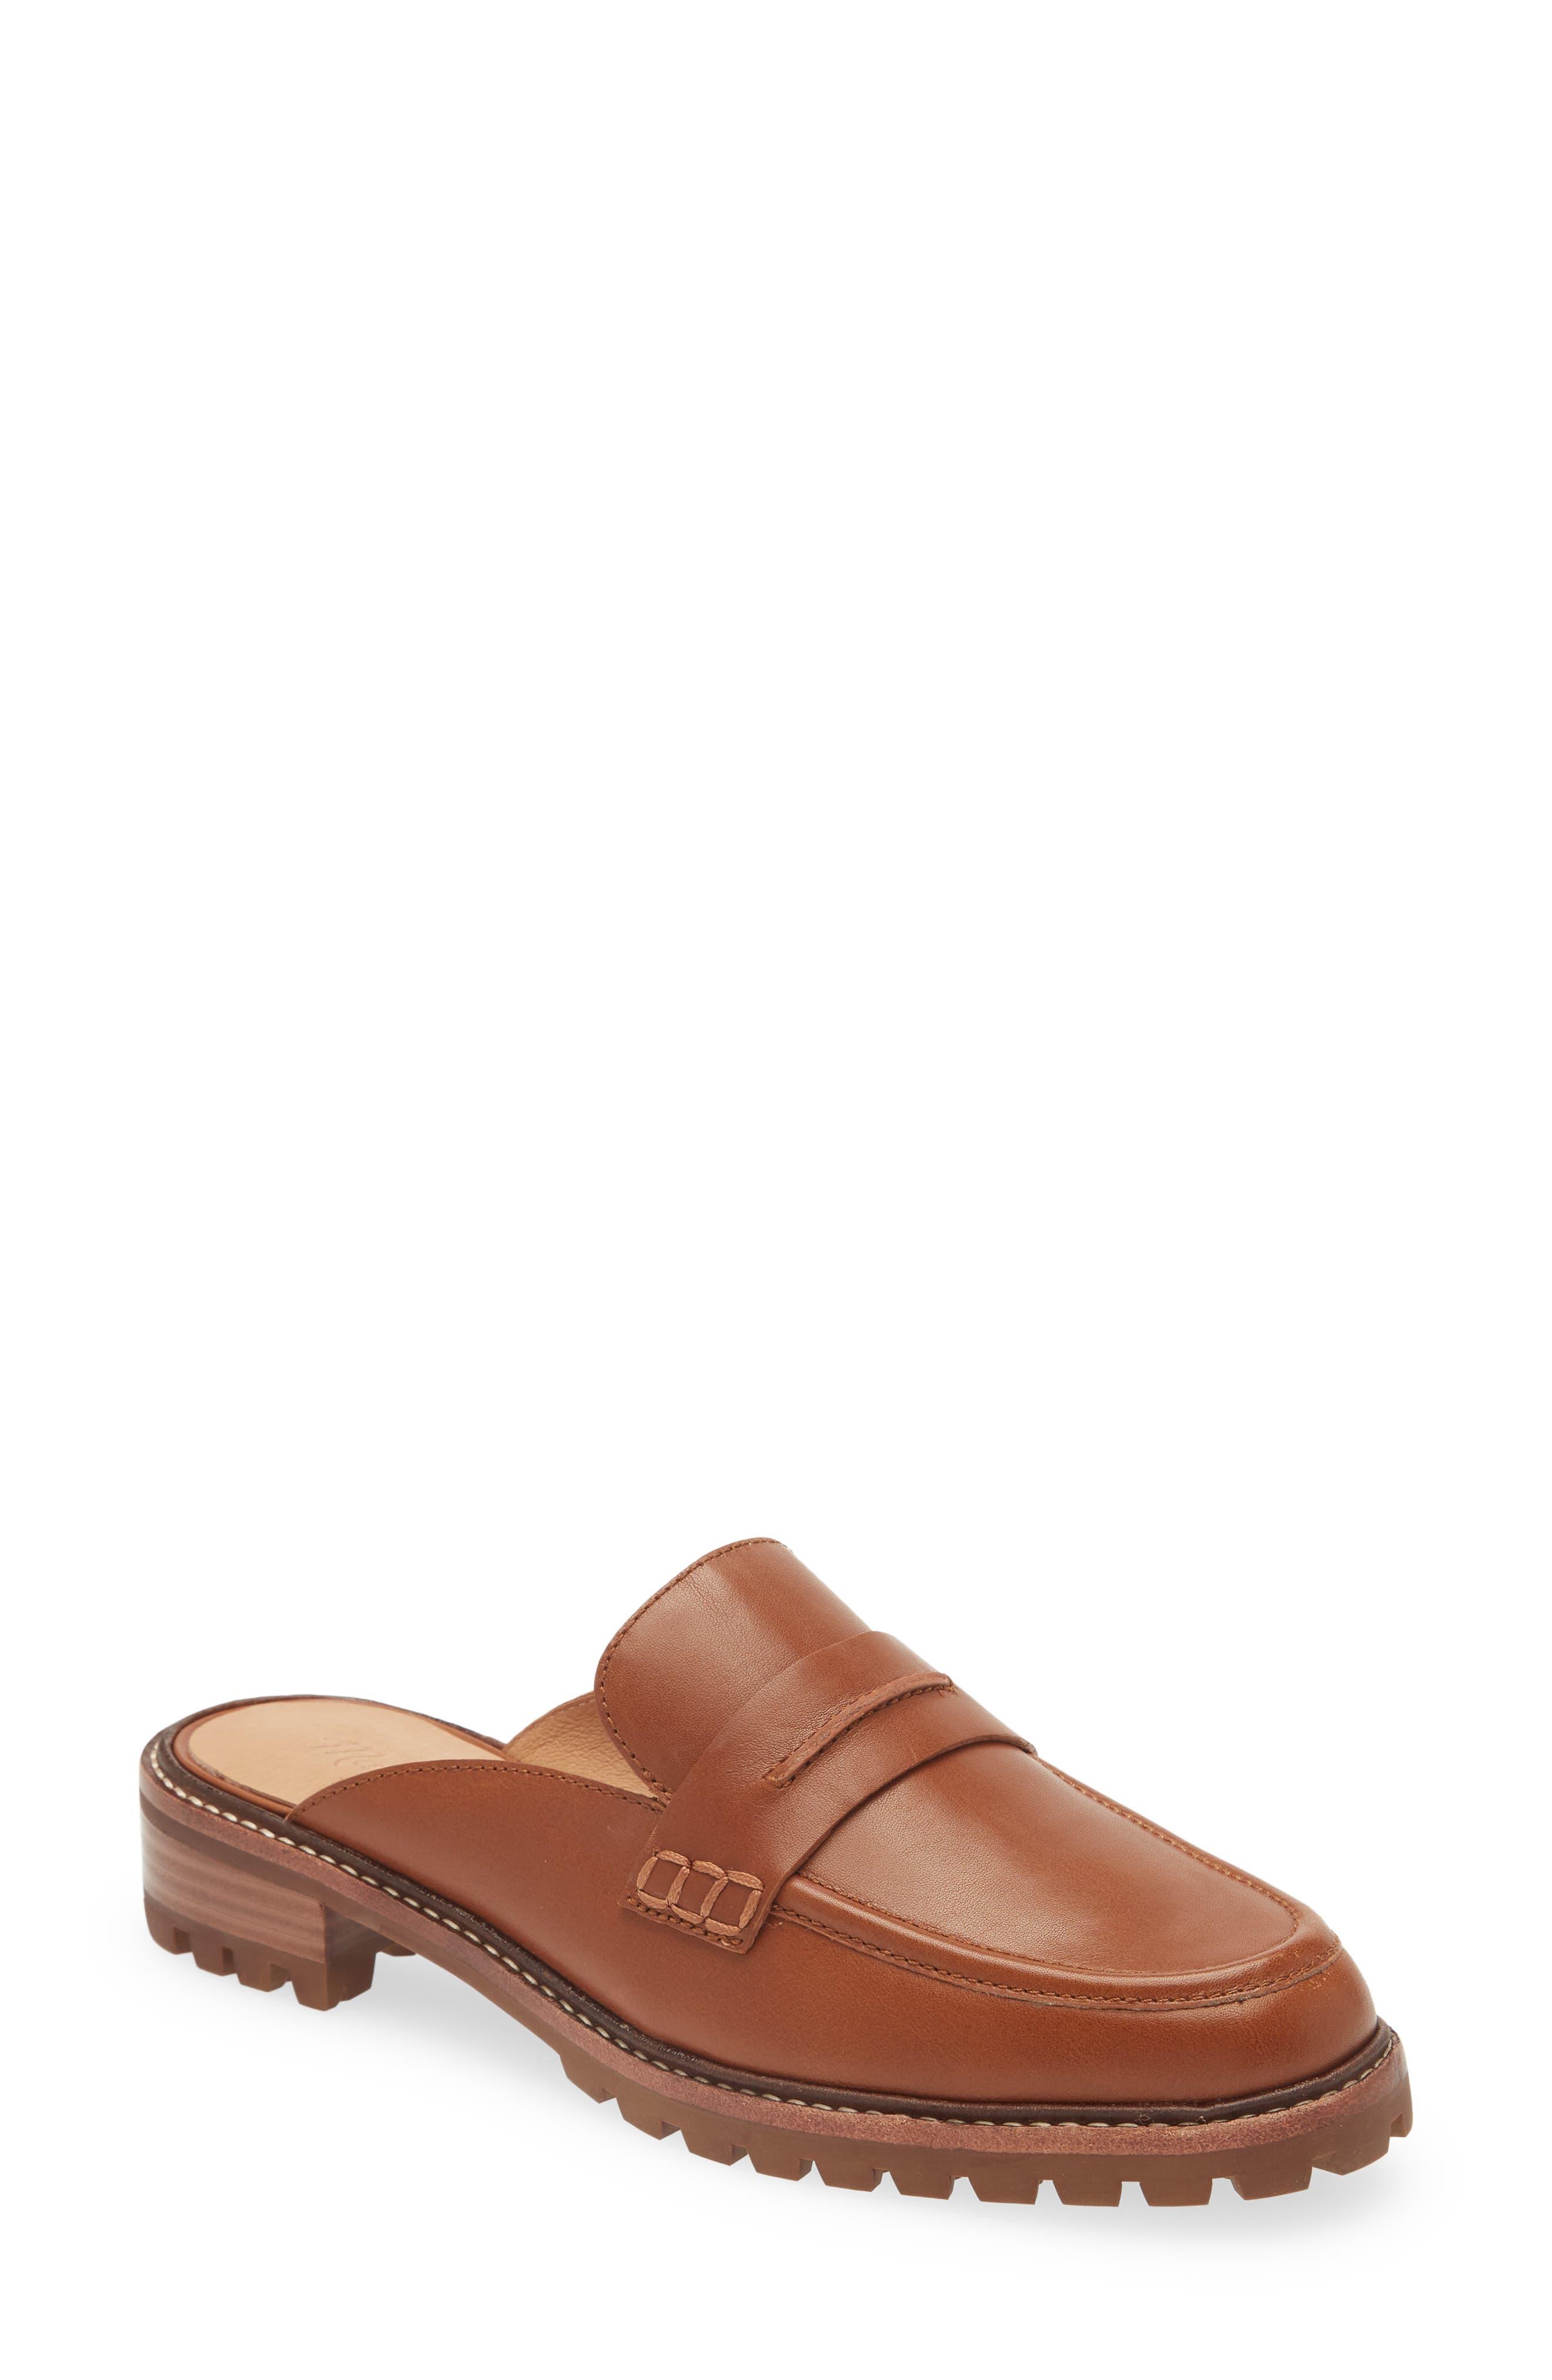 Madewell Lug Sole Loafer Mule in Brown | Lyst